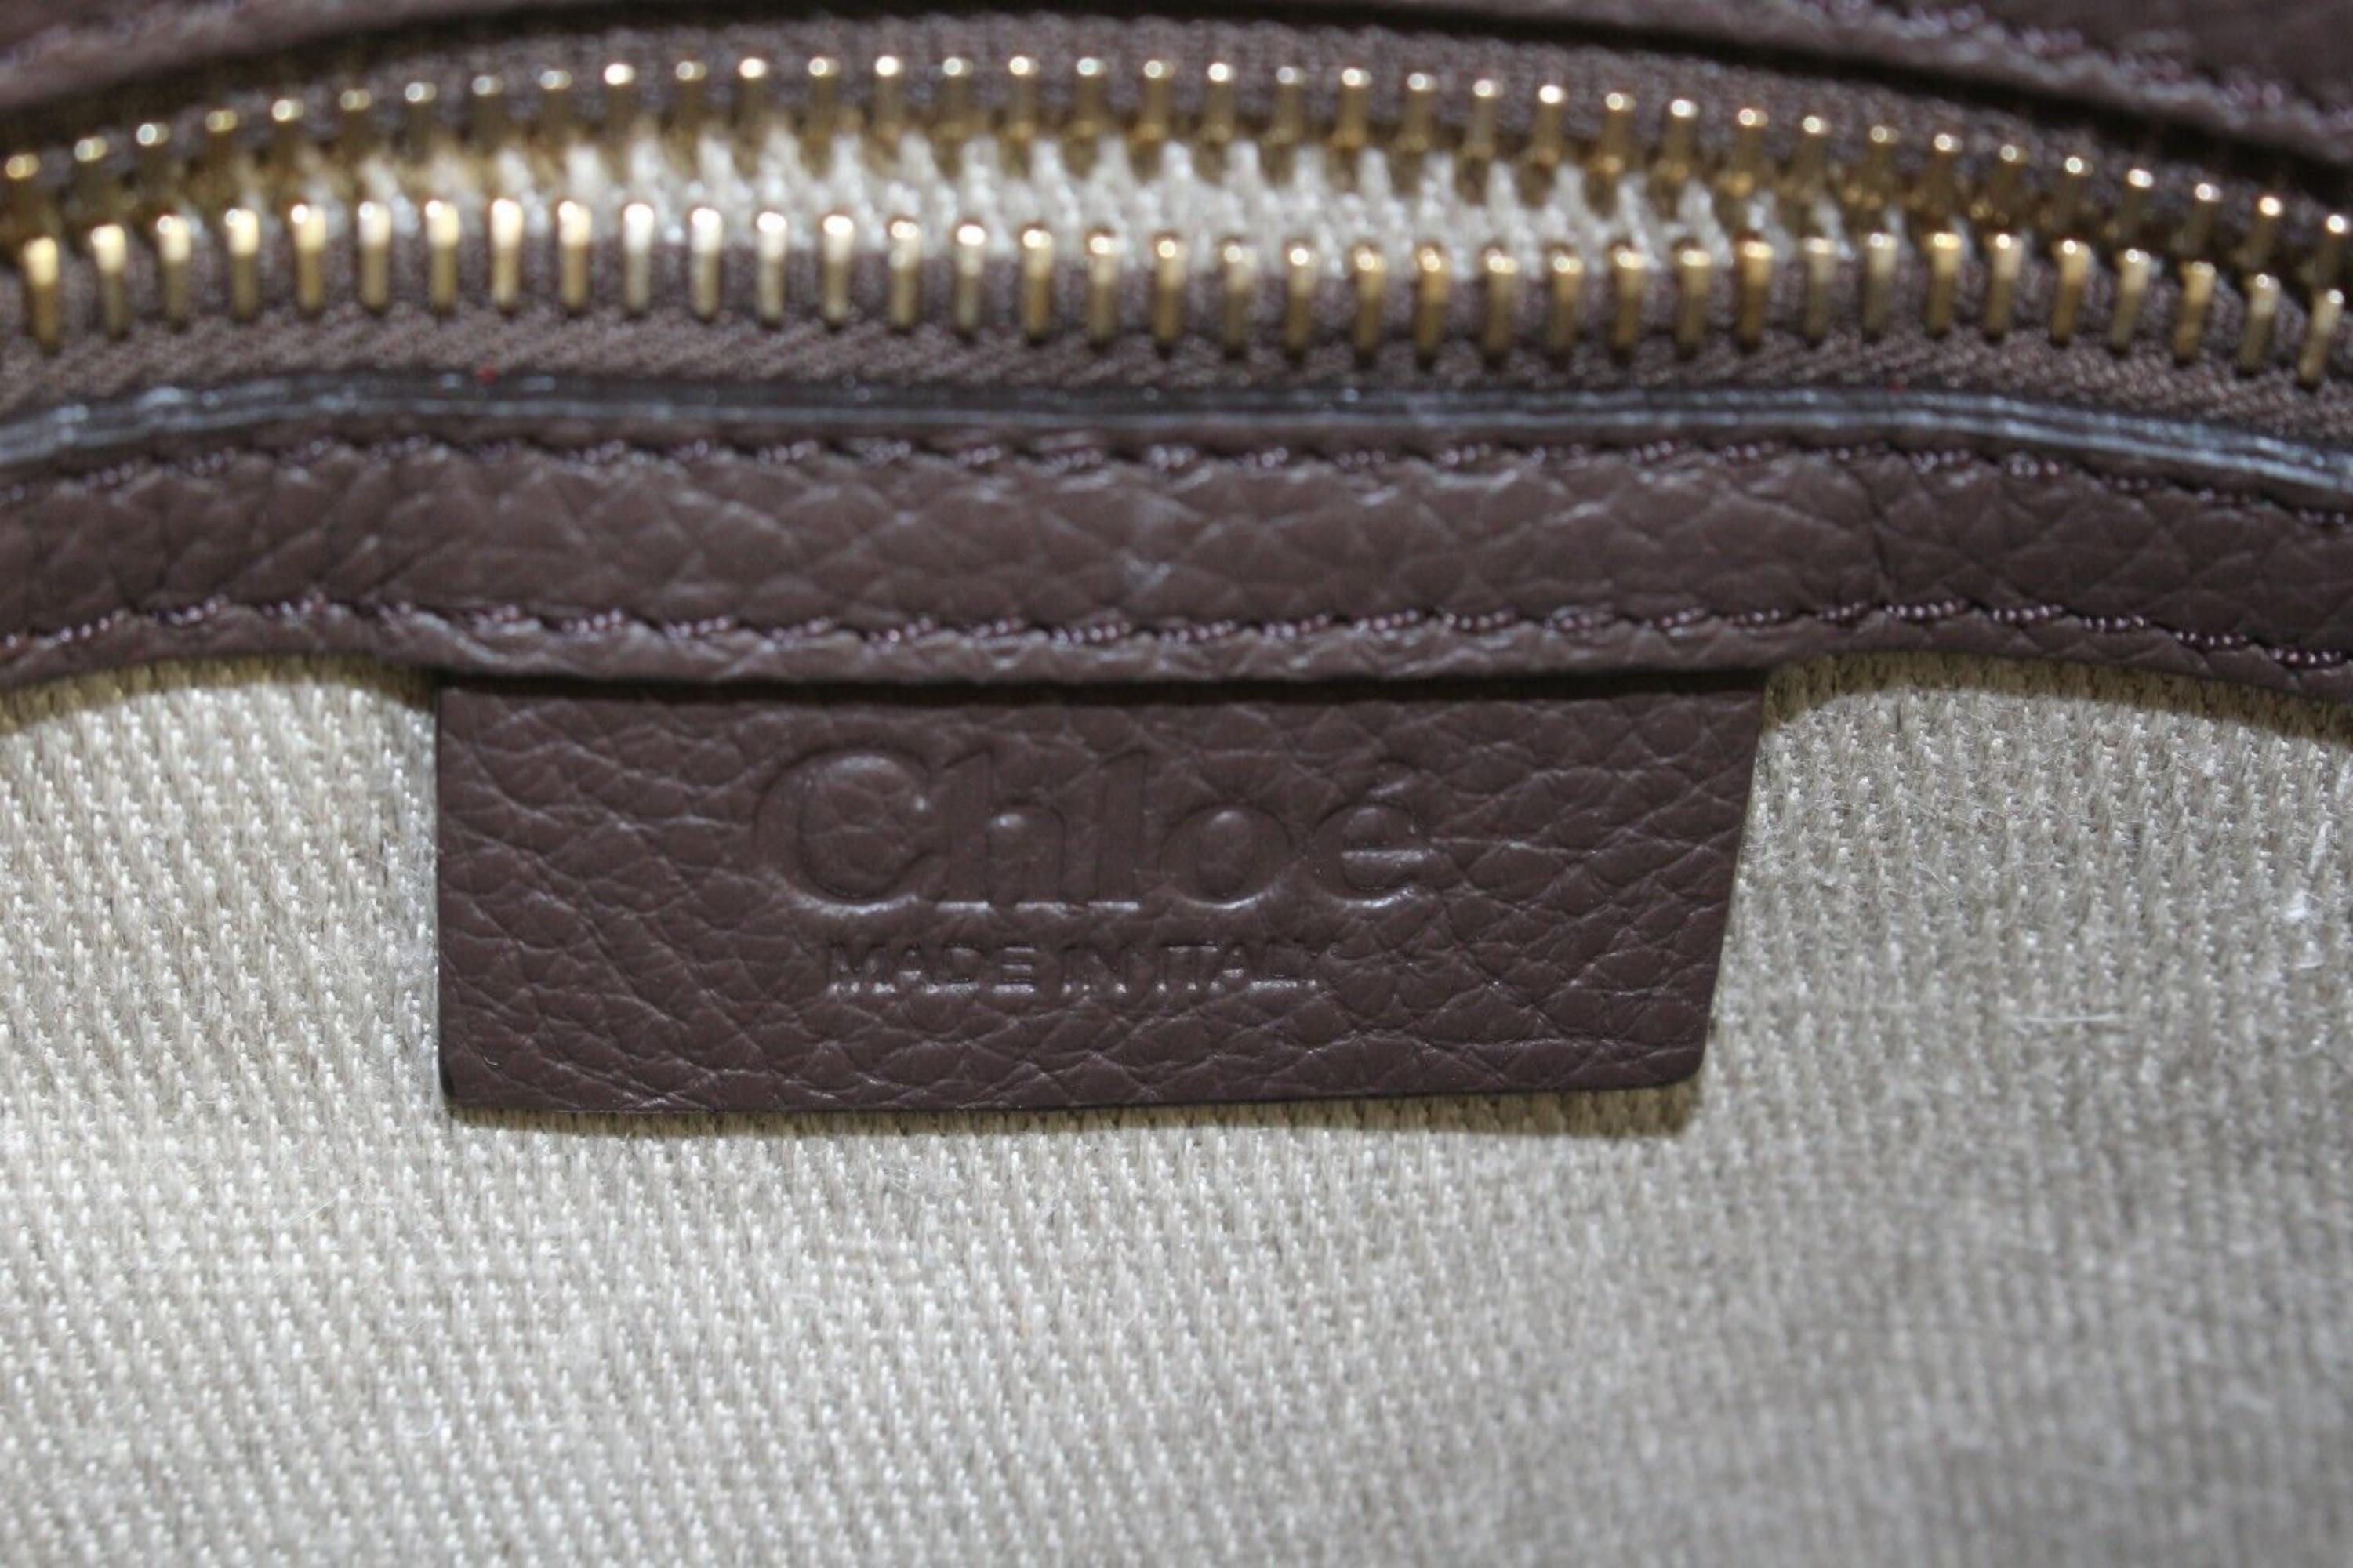 Date Code/Serial Number: 03-22-63-65

Made In: Italy

Measurements: Length:  14